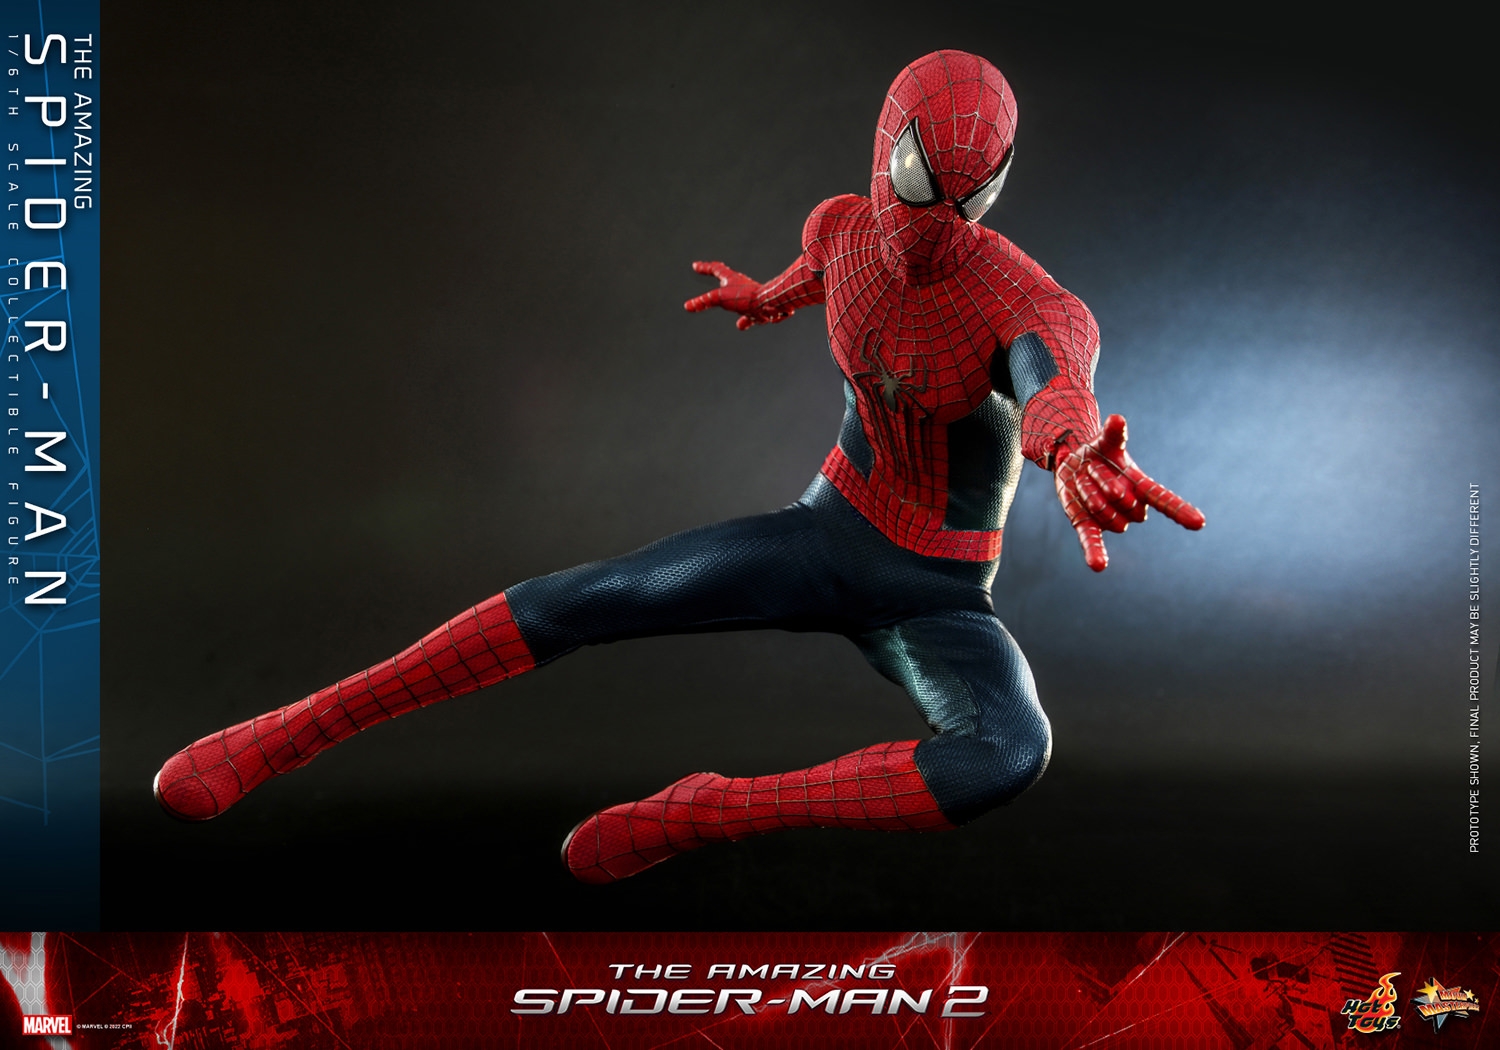 the-amazing-spider-man_marvel_gallery_6414d09e9a838.jpg